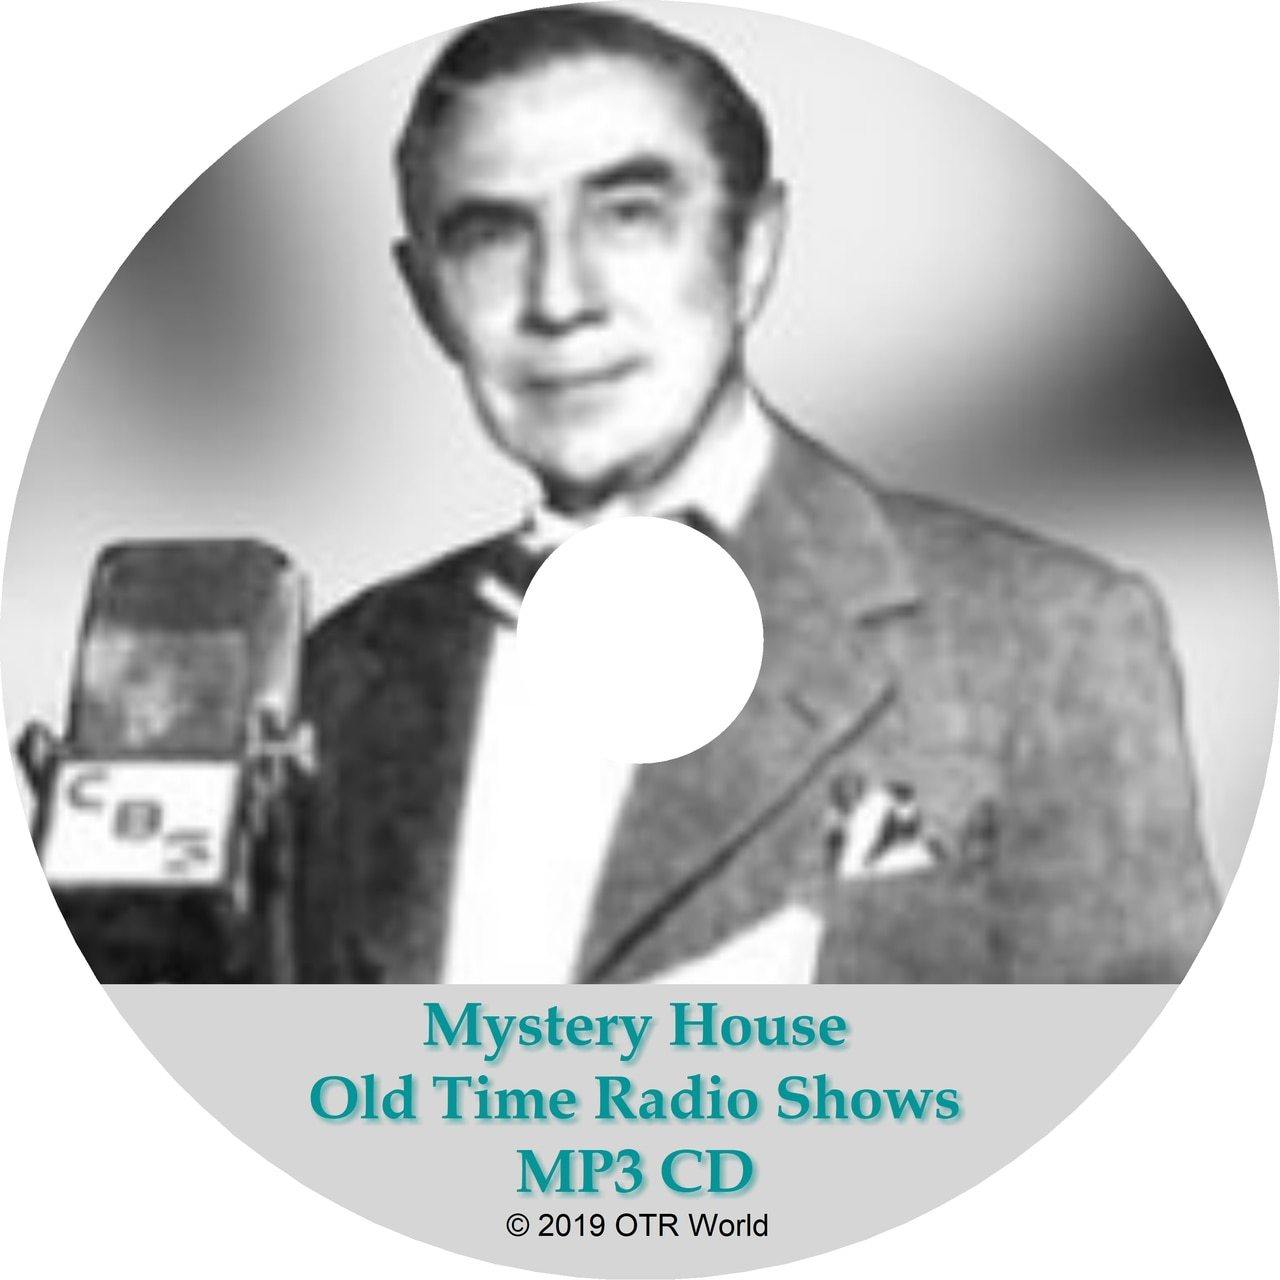 Mystery House Old Time Radio Shows 16 Episodes On MP3 CD - OTR World